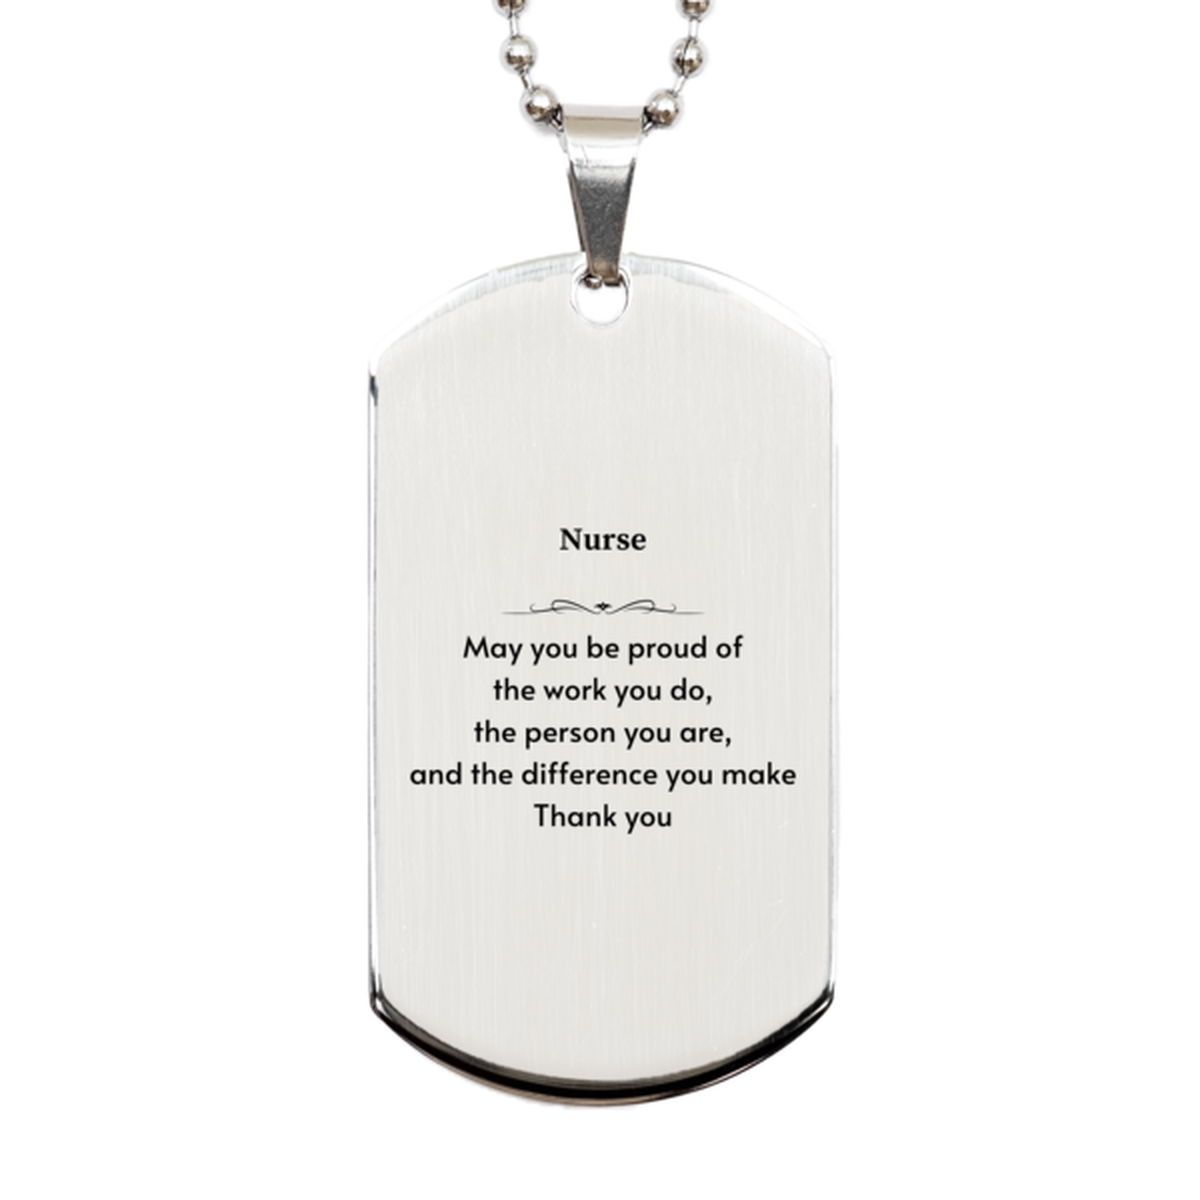 Heartwarming Silver Dog Tag Retirement Coworkers Gifts for Nurse, Nurse May You be proud of the work you do, the person you are Gifts for Boss Men Women Friends